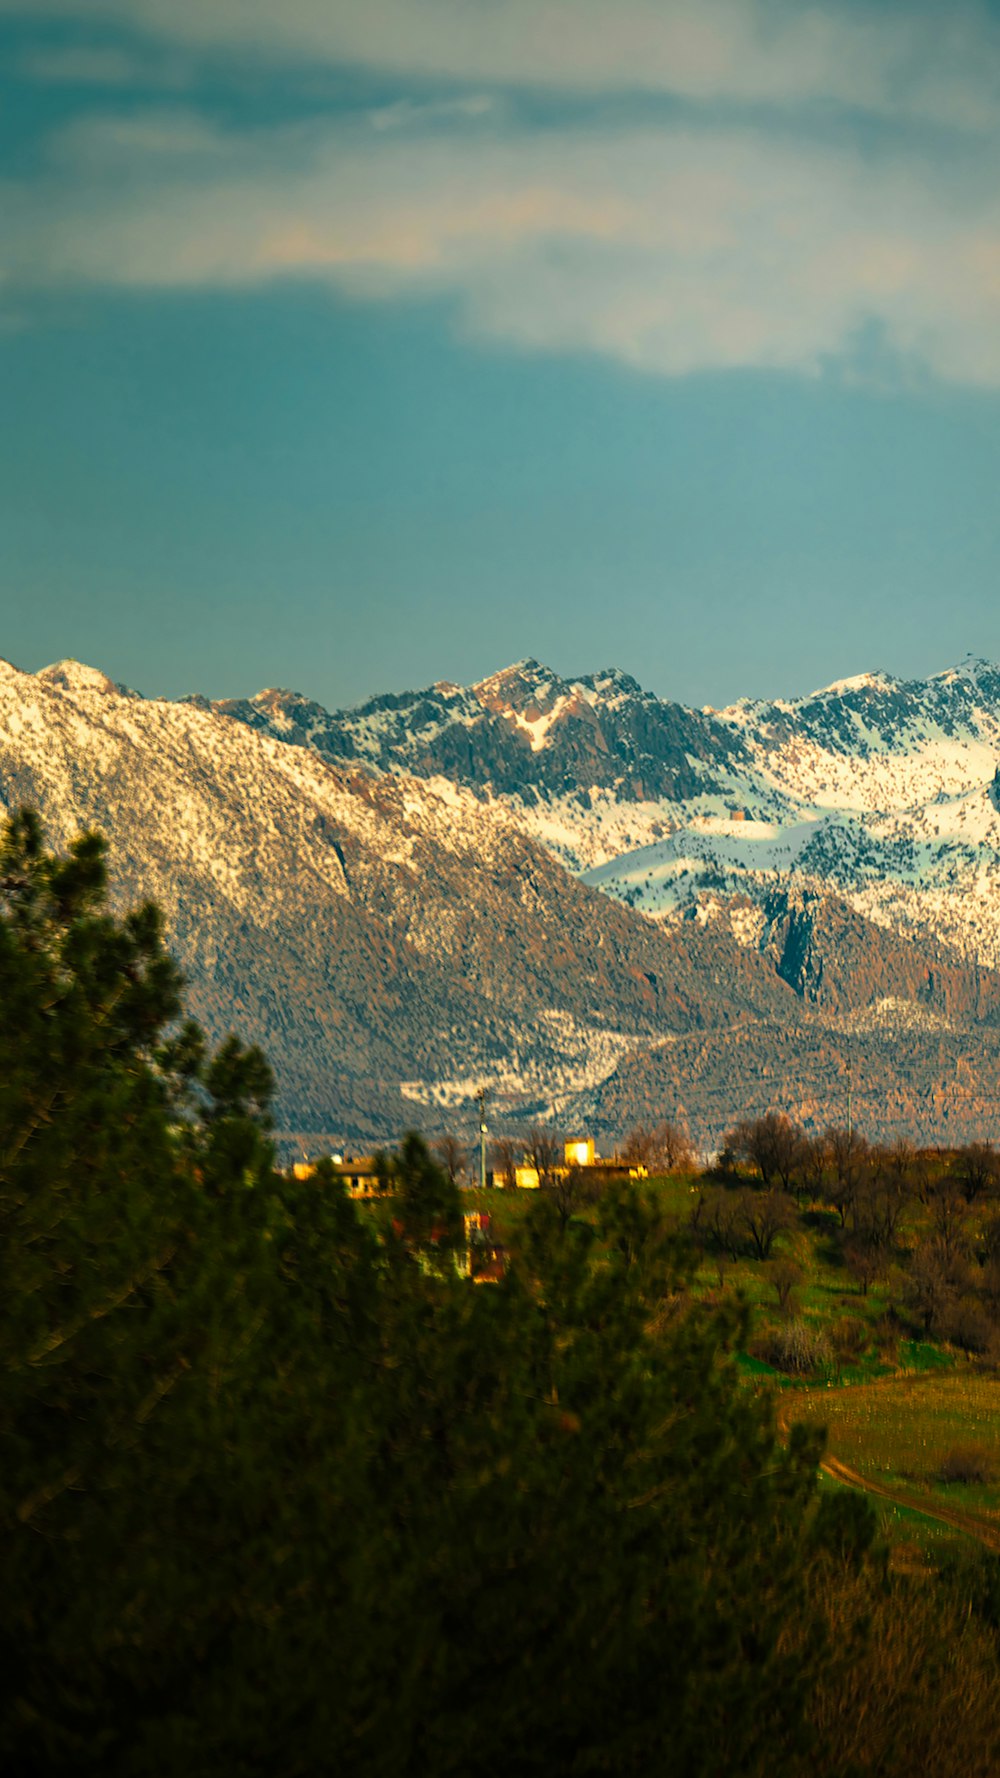 a view of a snowy mountain range from a distance